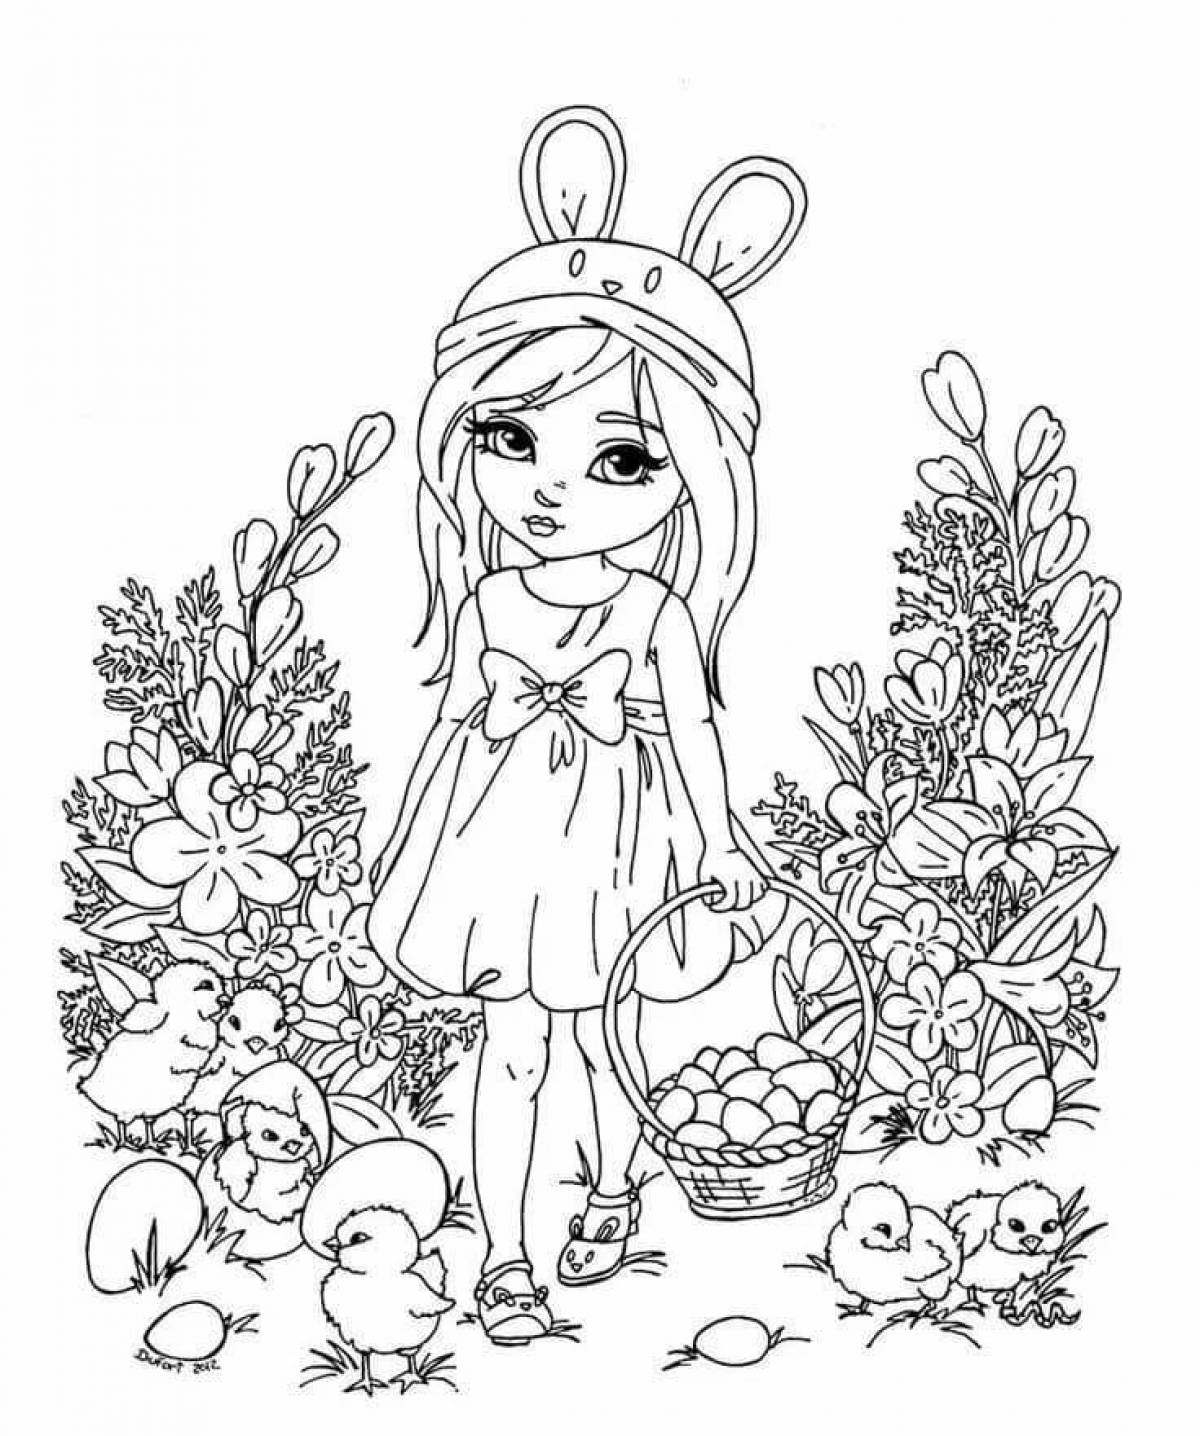 Adorable coloring book for girls 10-12 years old